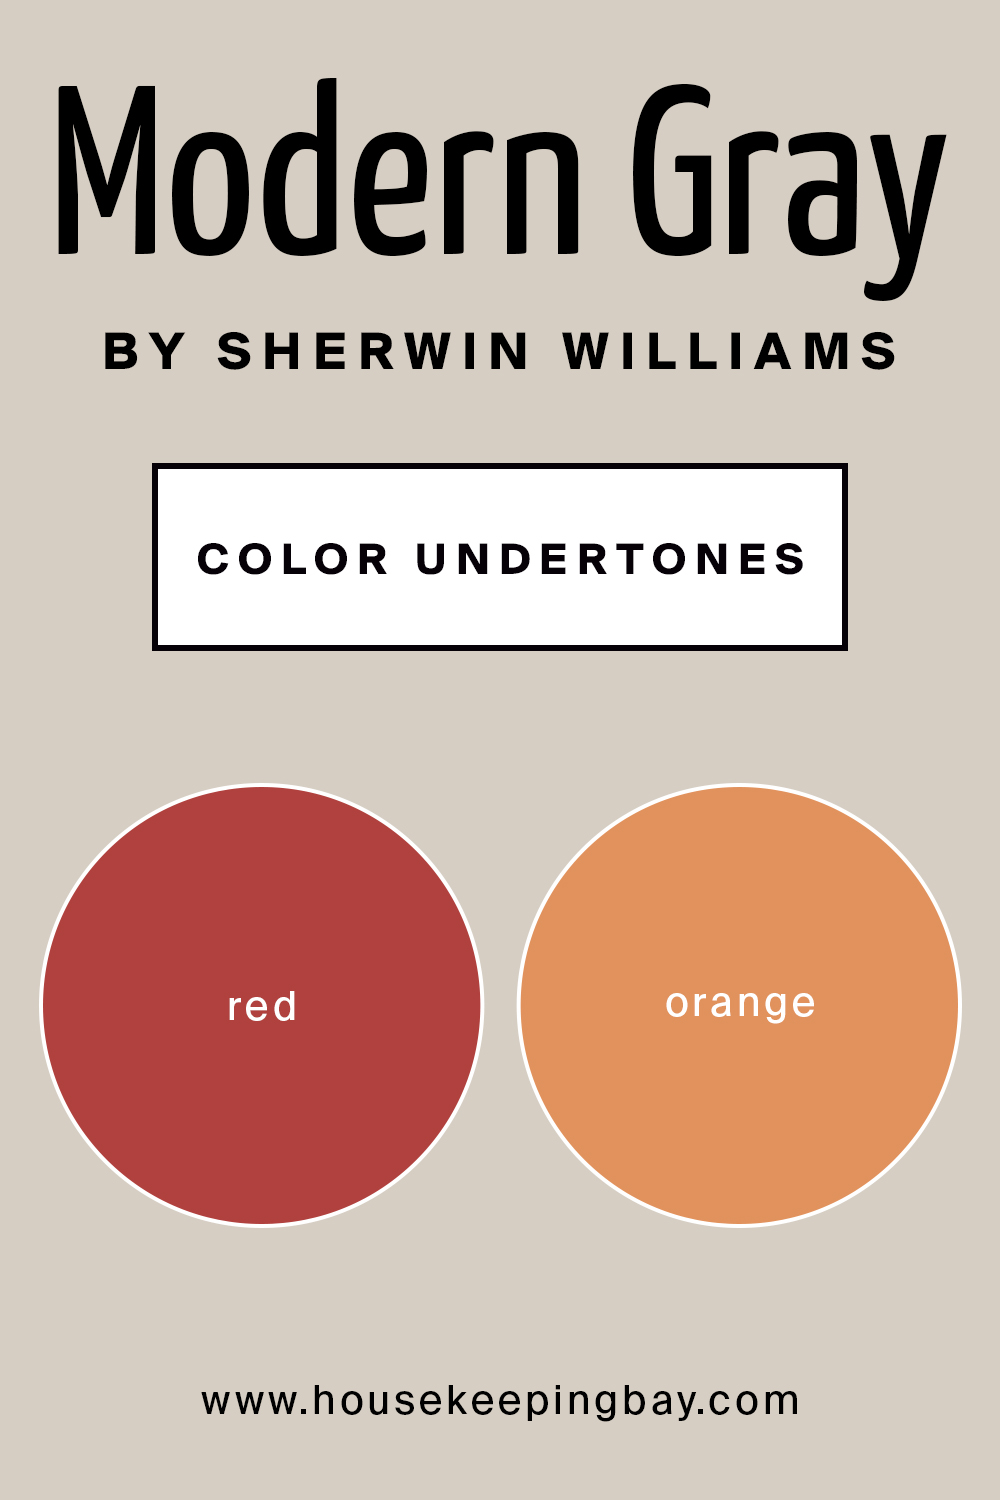 Modern Gray by Sherwin Williams Color Undertones